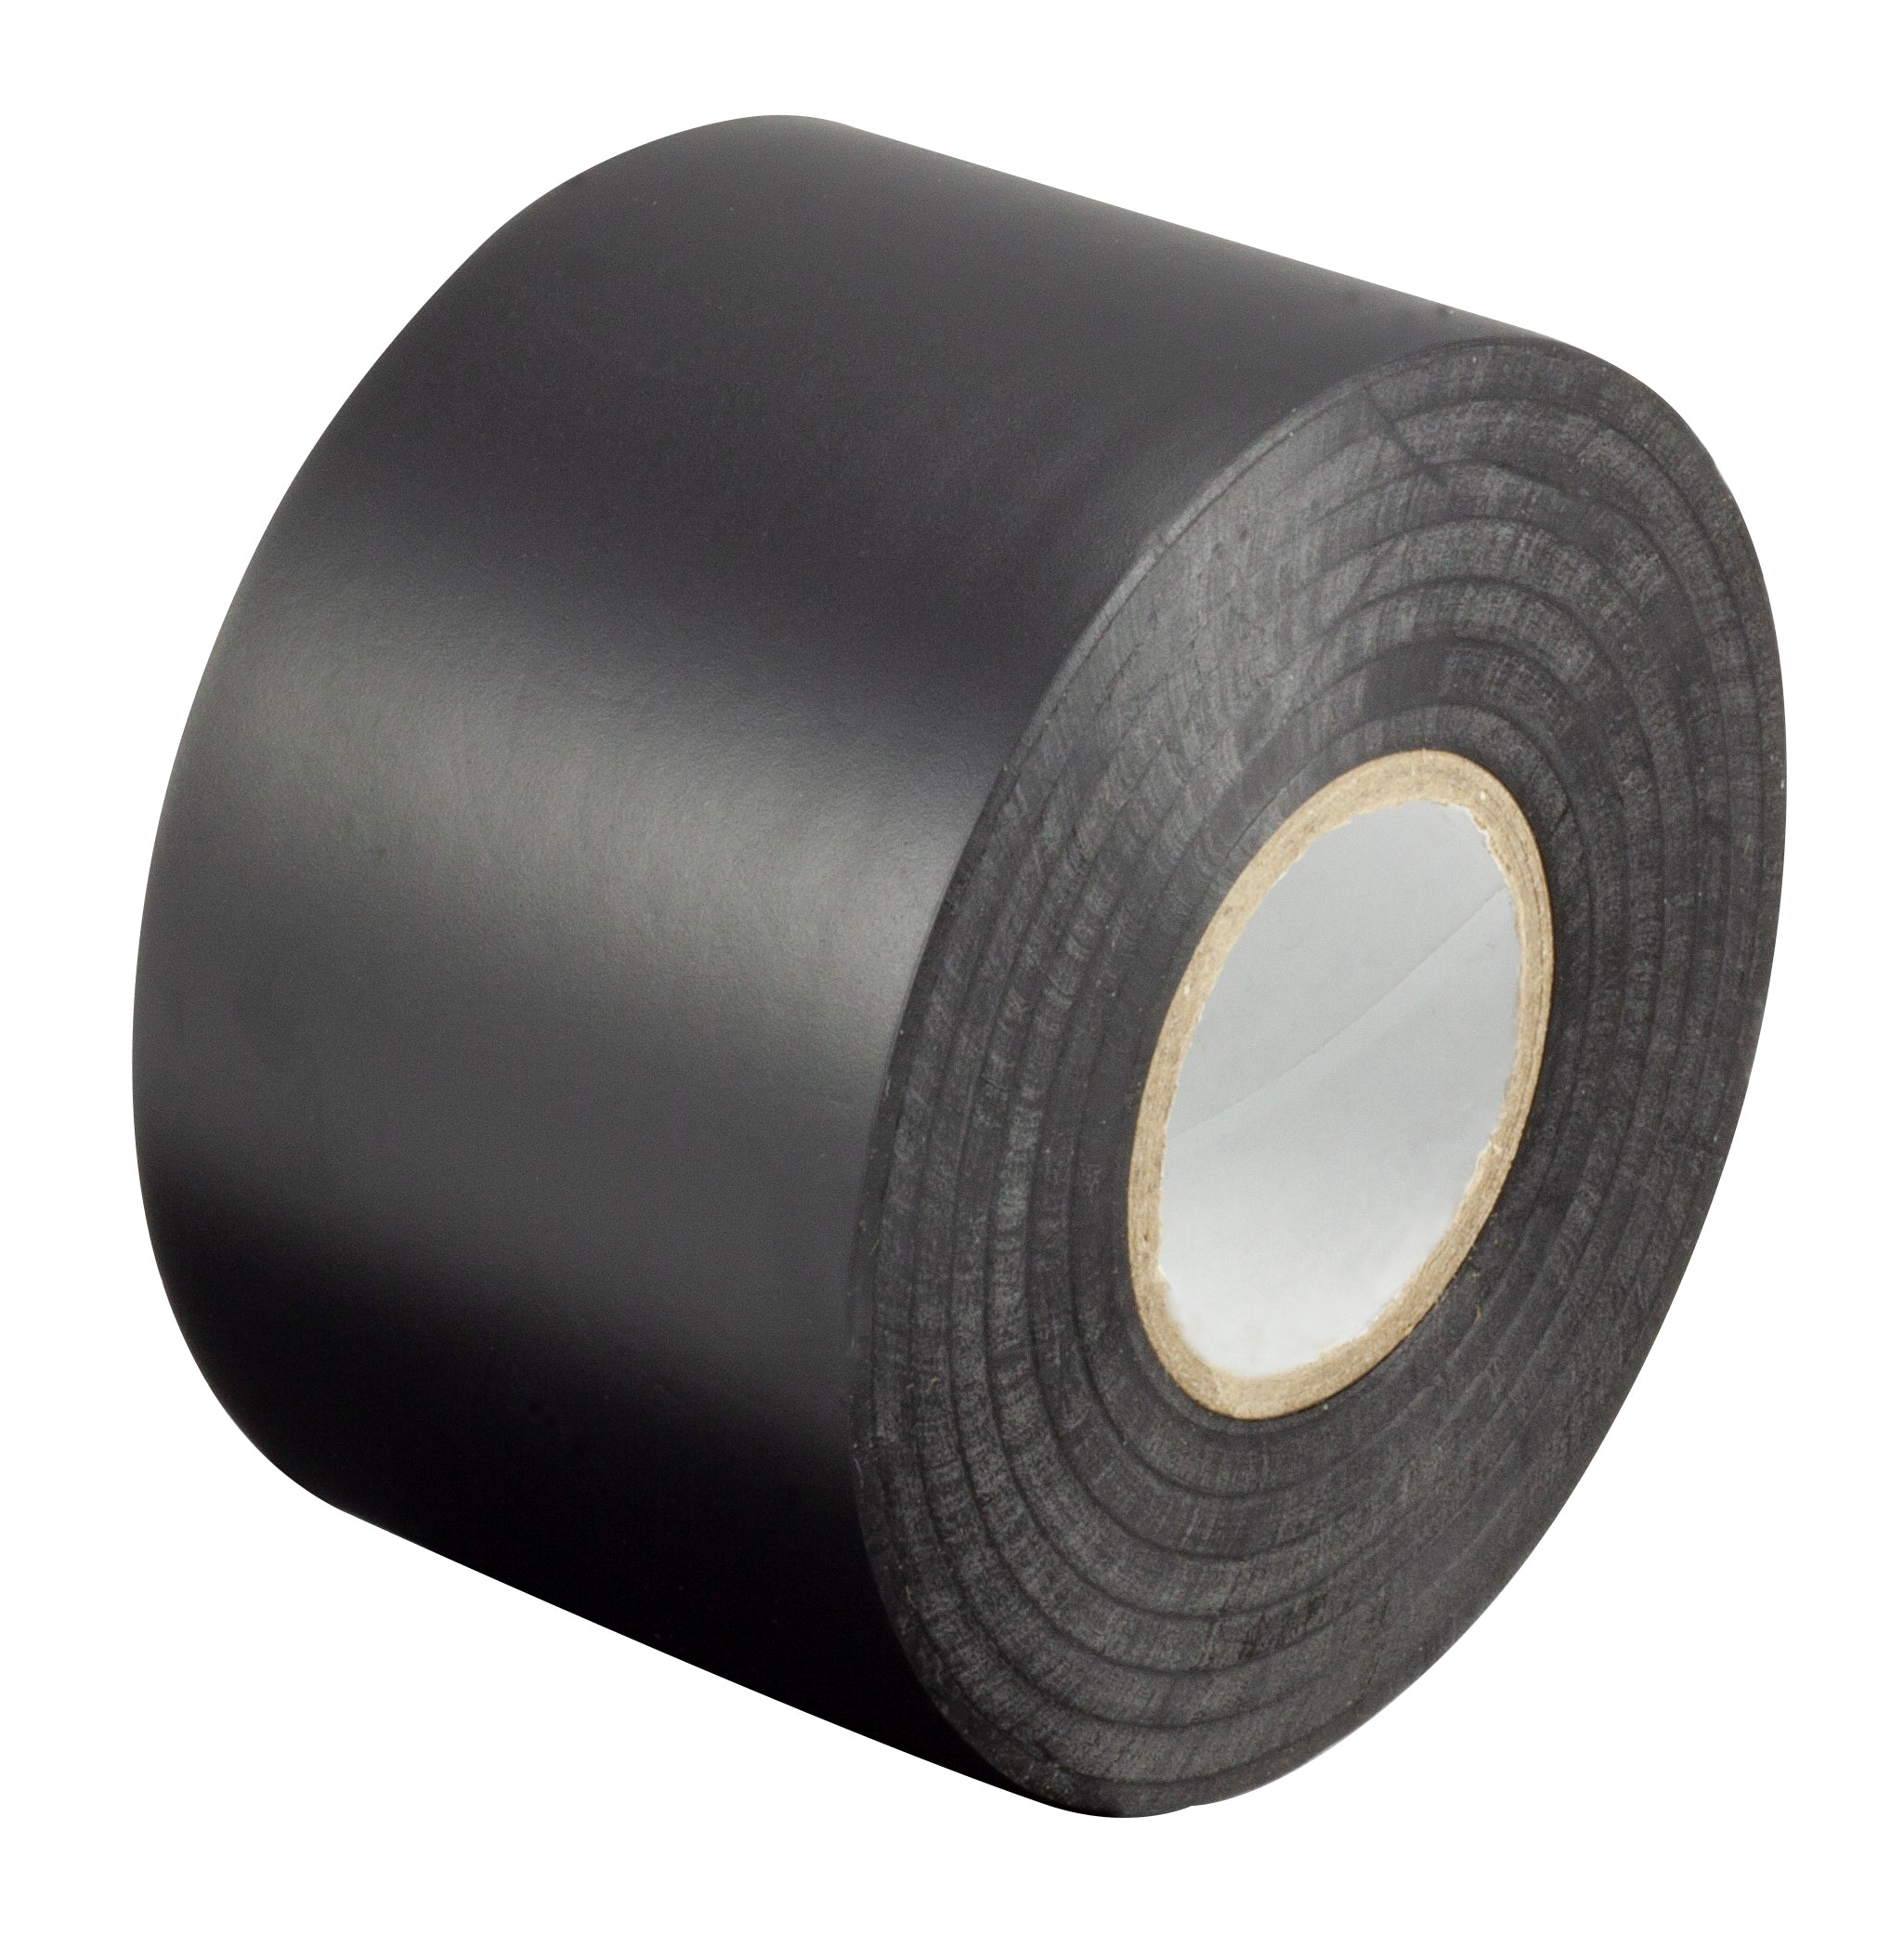 PVC Tape Size: 50mmx33m Roll - BLACK - Pack of 10